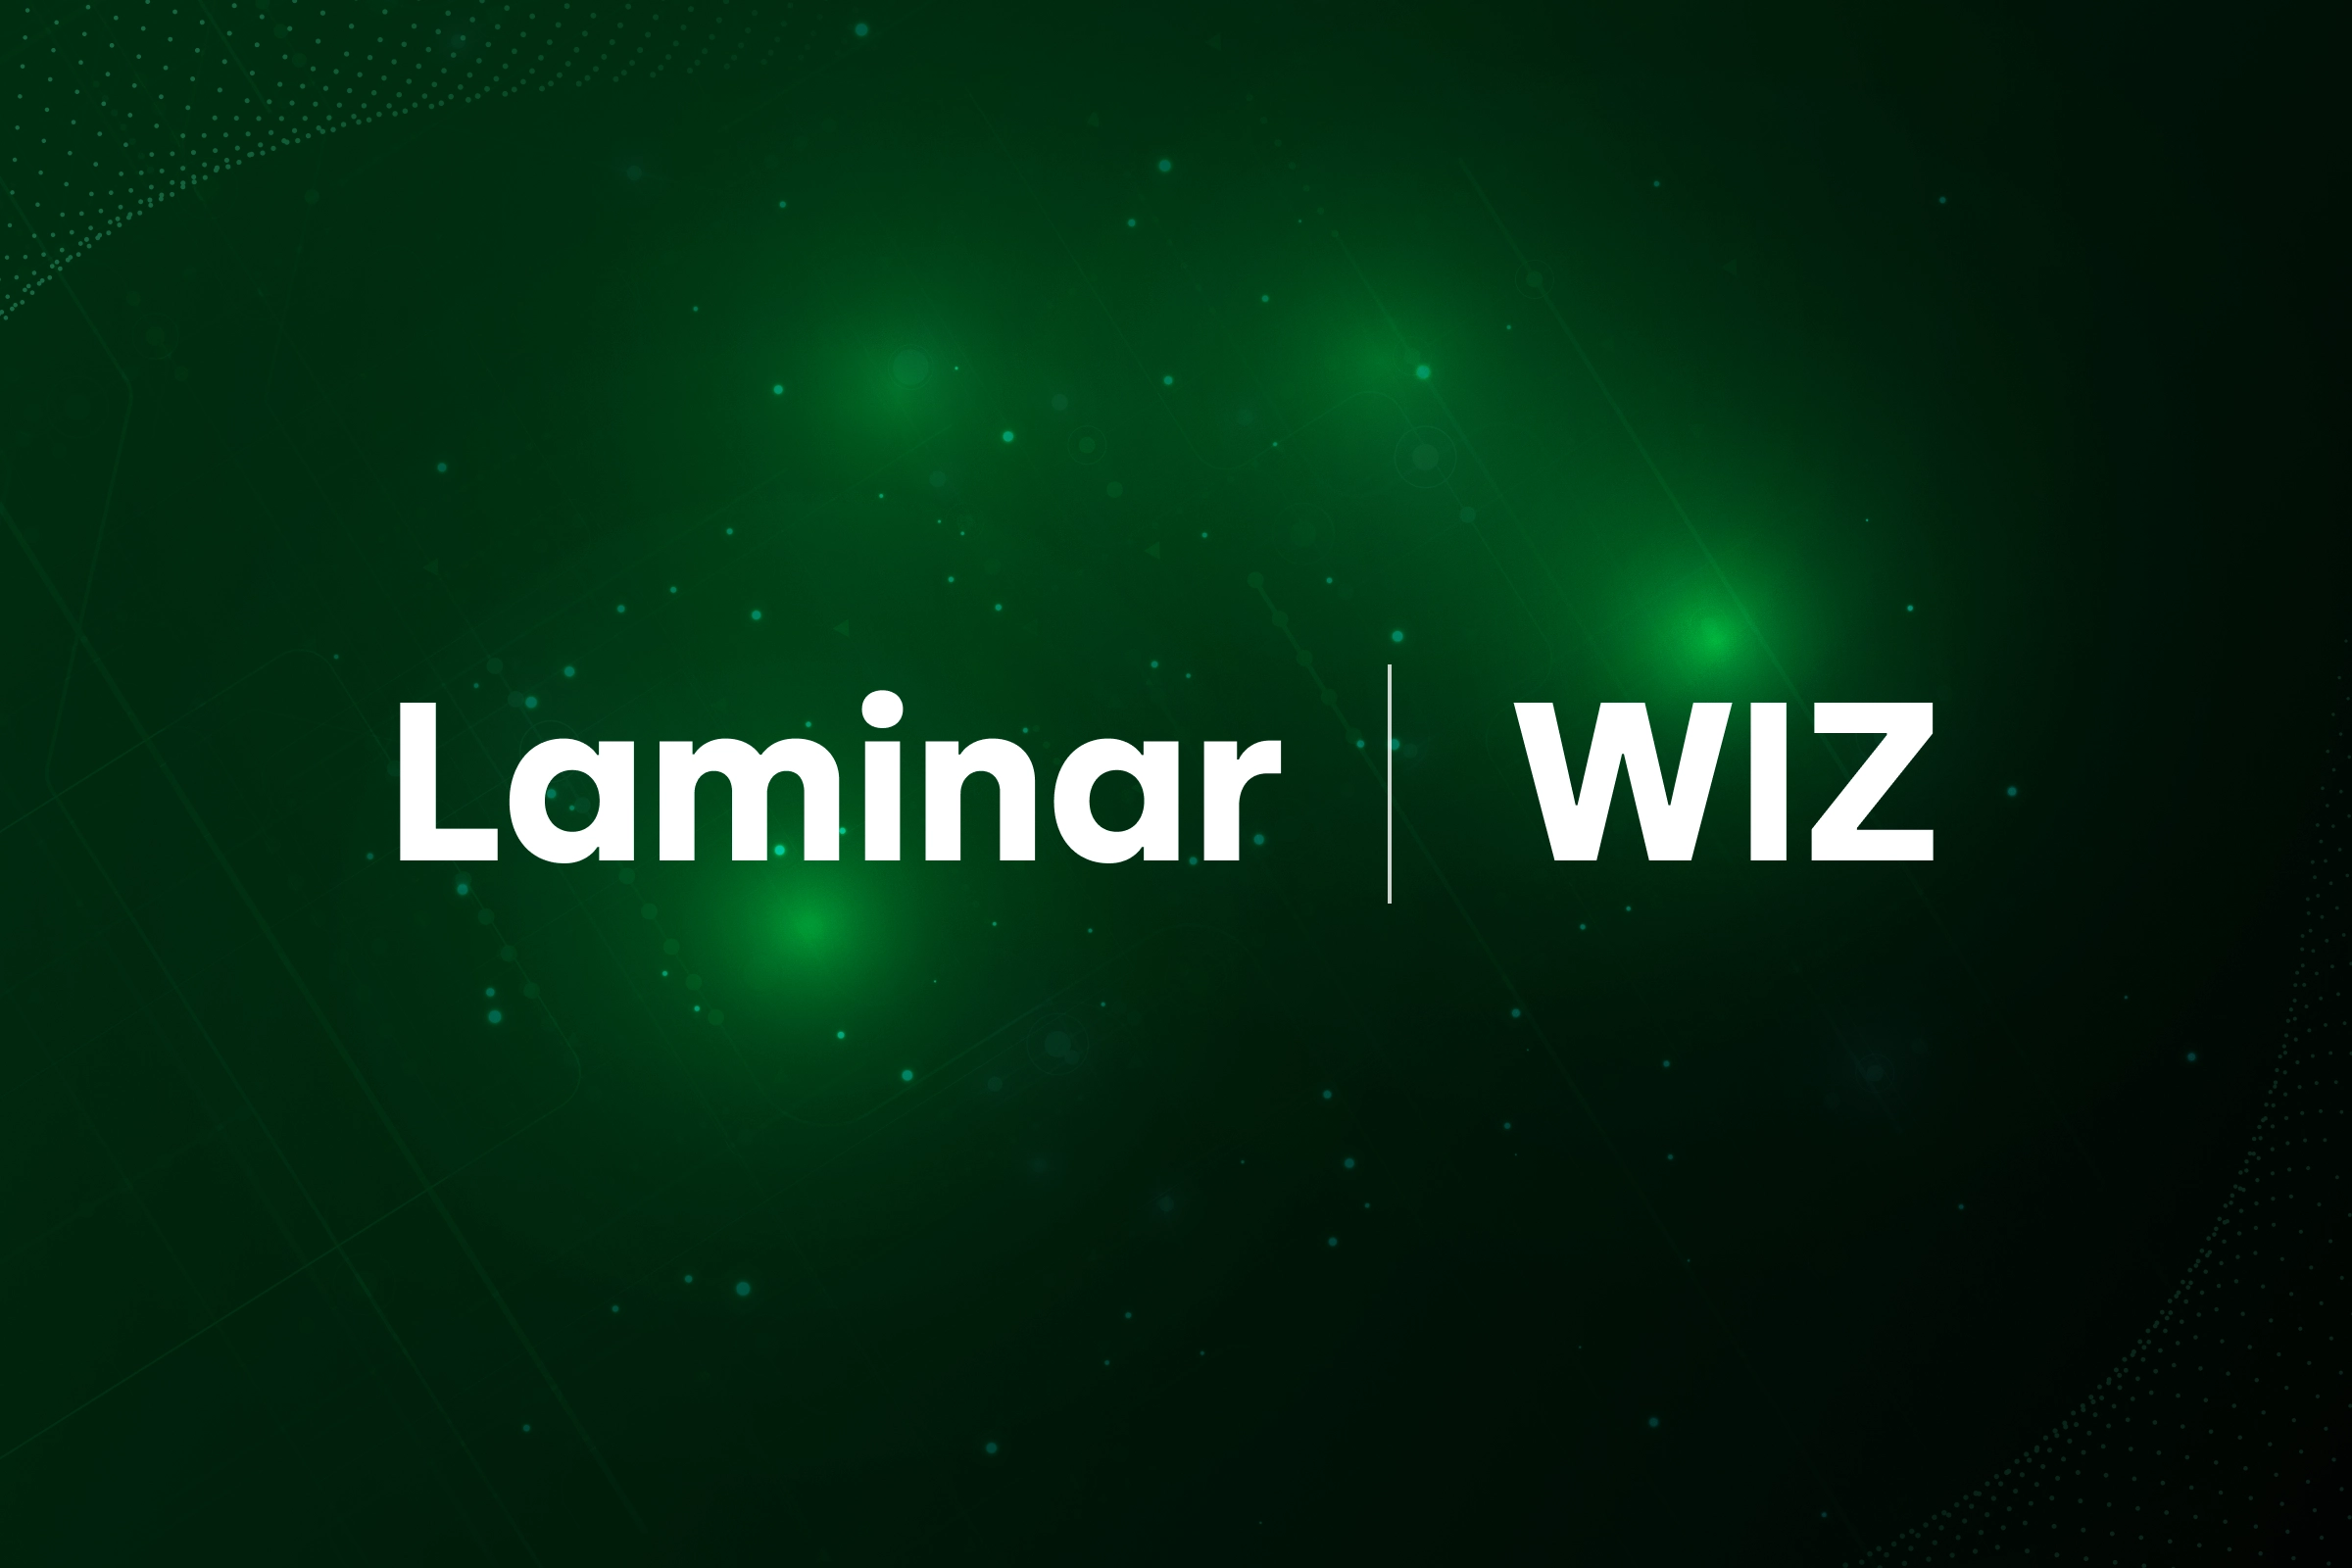 Wiz and Laminar Bring Together Best-of-Breed Cloud Security Capabilities to Help Customers Protect Their Most Critical Asset – Their Data